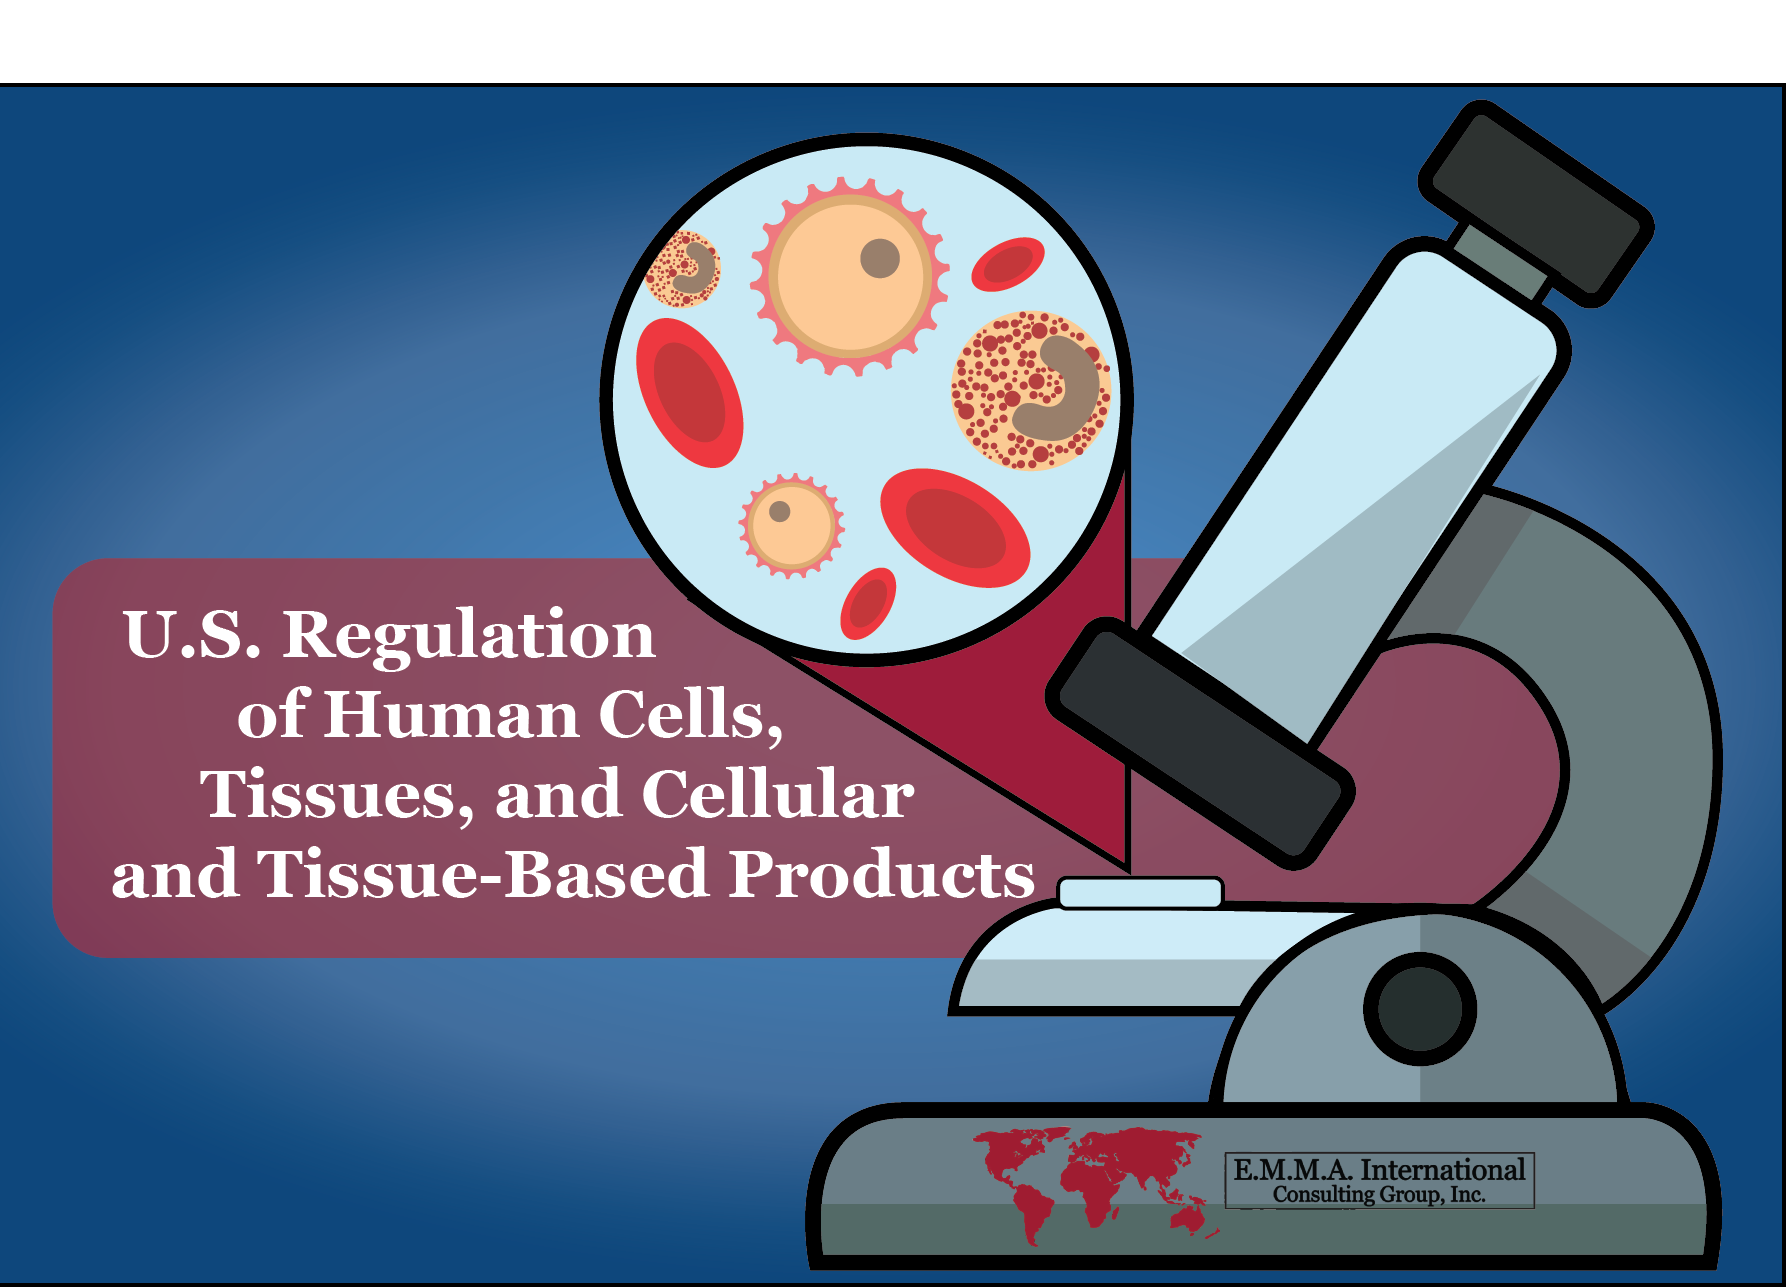 U.S. Regulation of Human Cells, Tissues, and Cellular and Tissue-Based Products